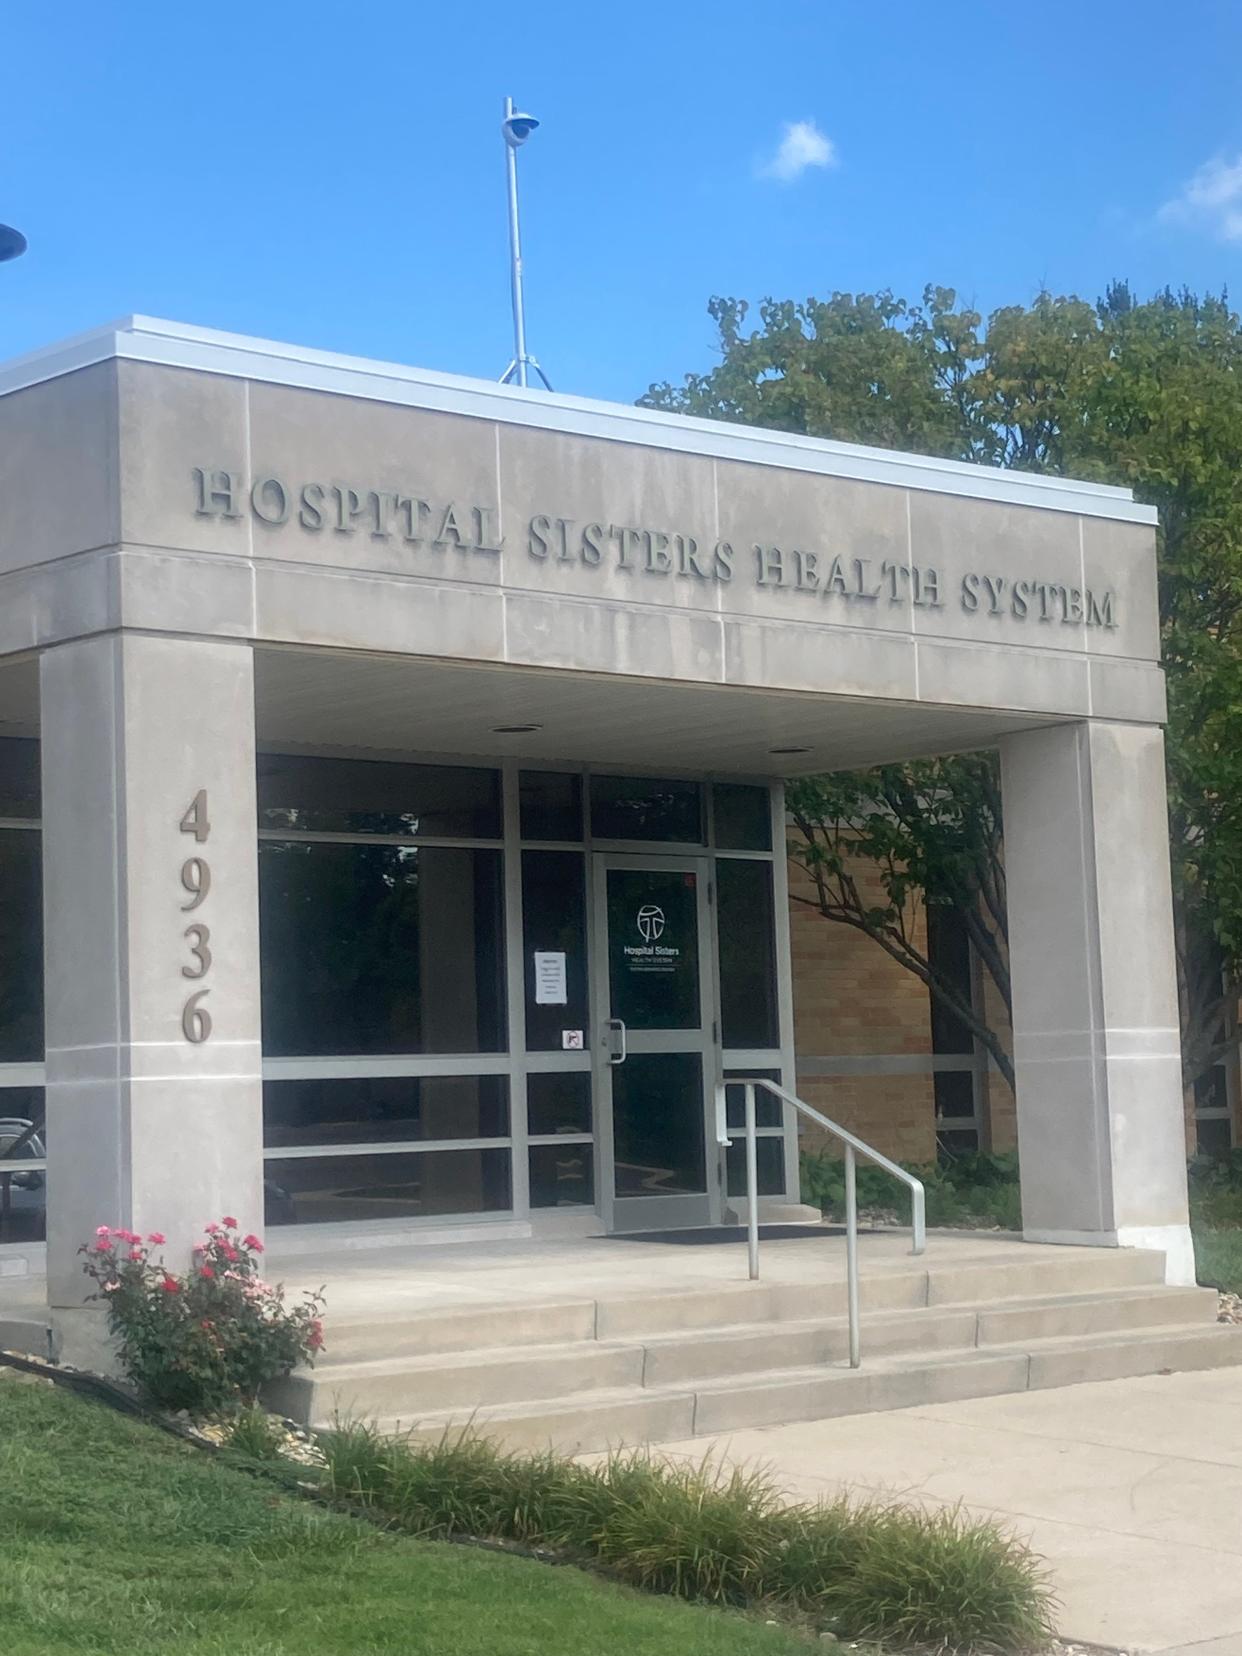 Hospital Sisters Health System is based in Springfield.